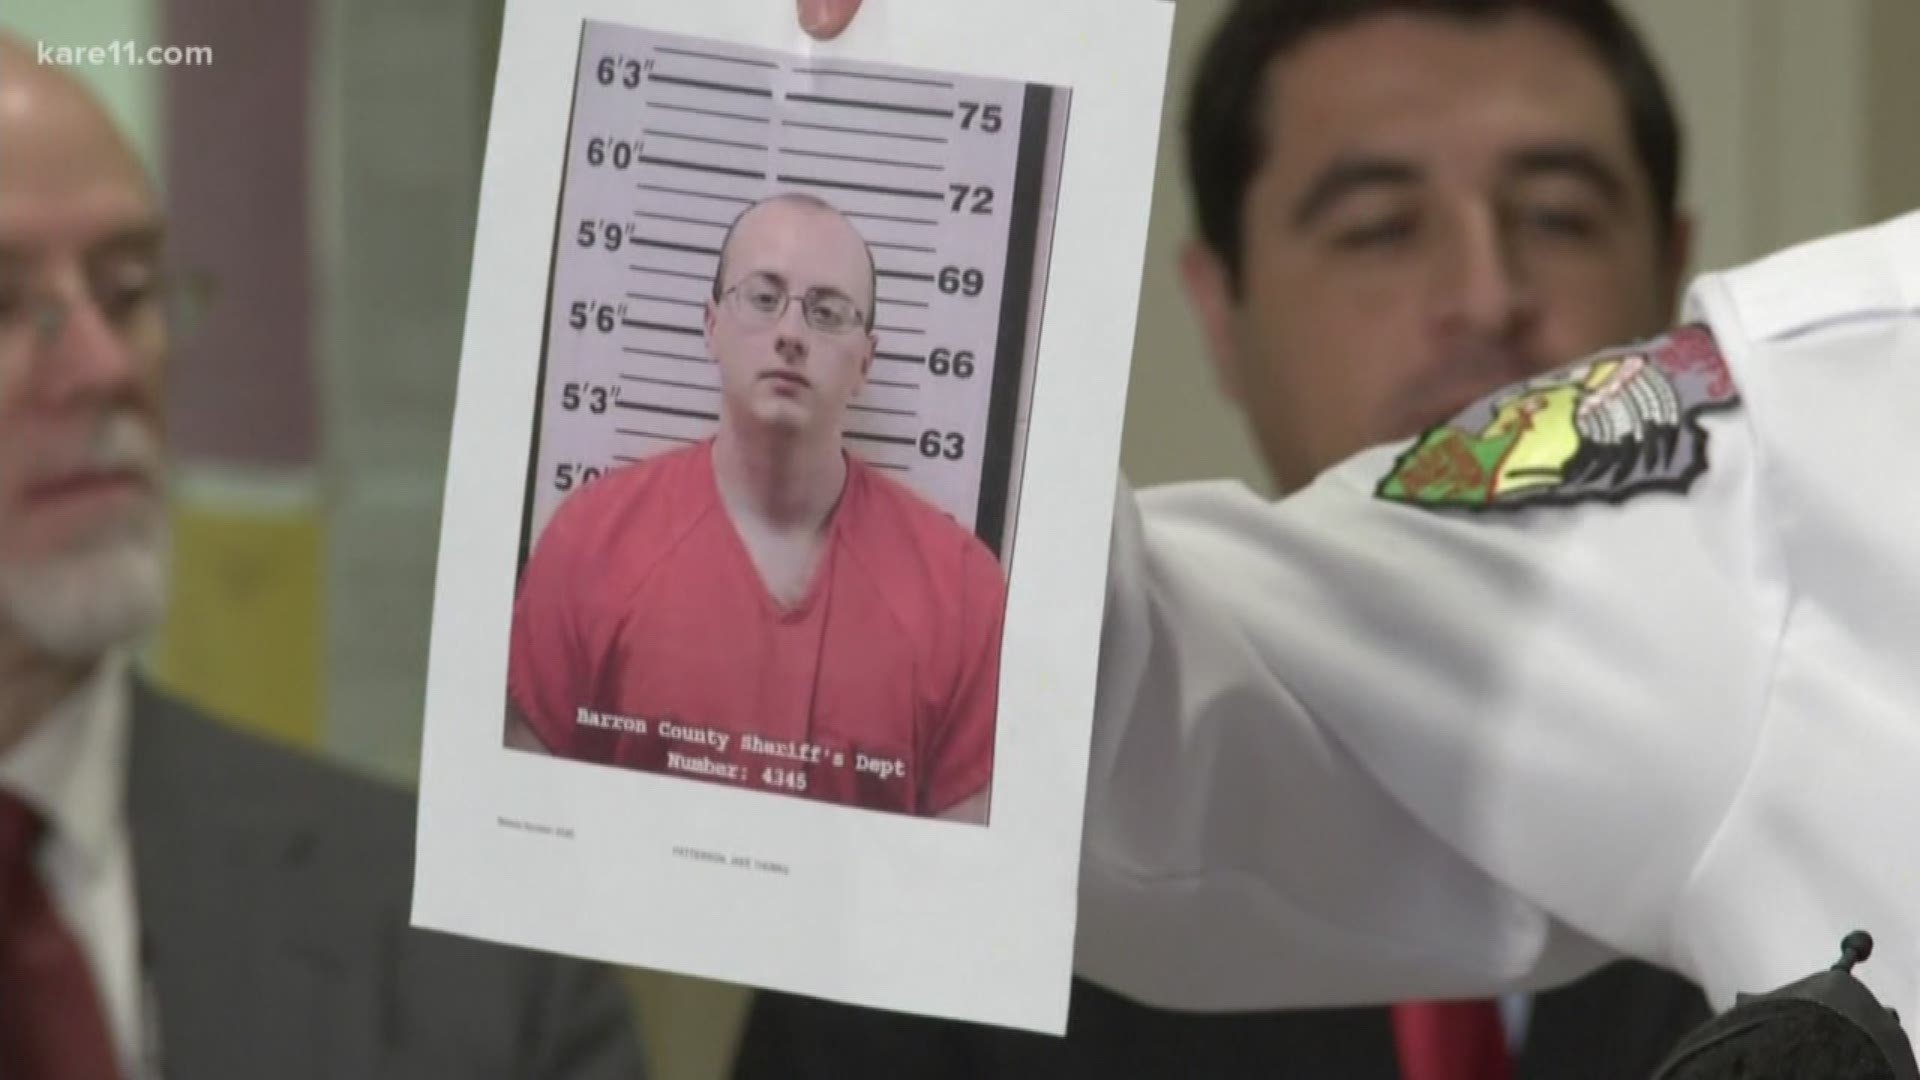 AJ Lagoe looks into the background of Jake Patterson, the man suspected of kidnapping Jayme Closs and killing her parents.